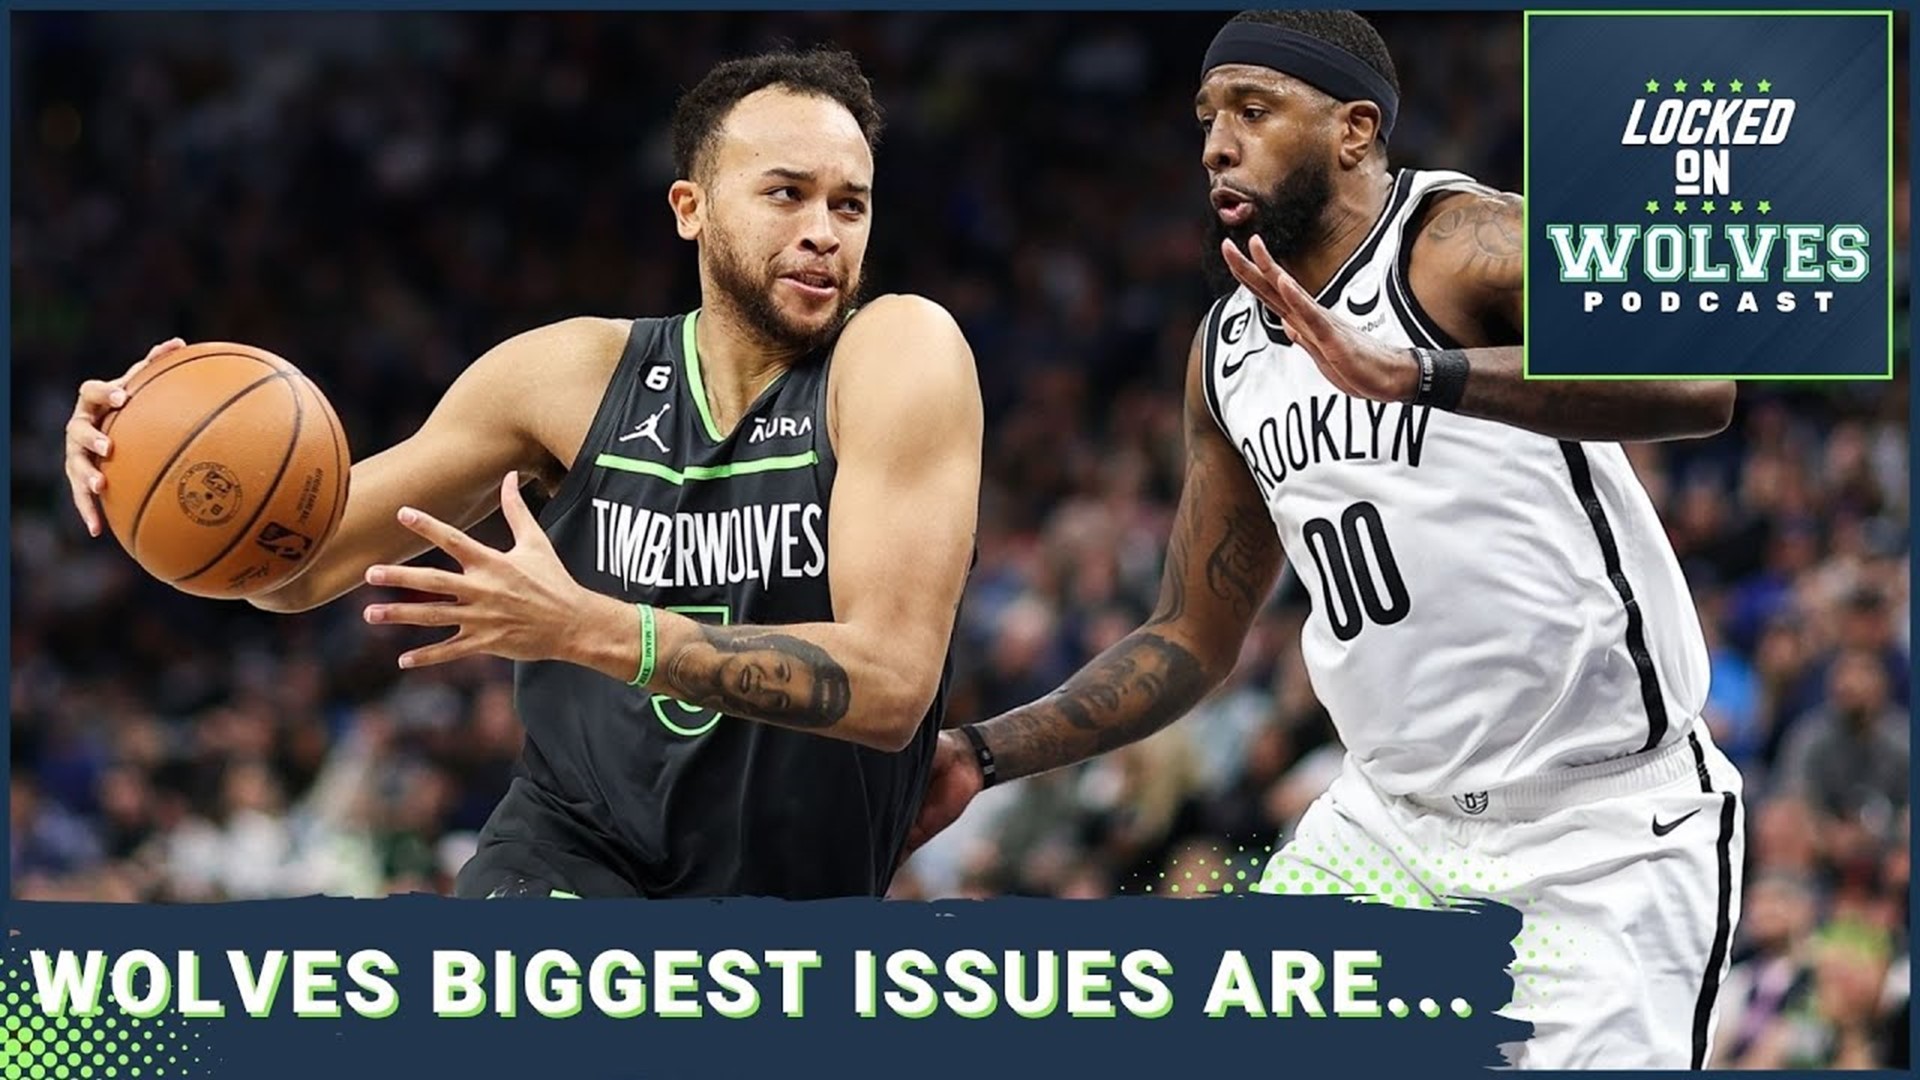 The Timberwolves' biggest issues entering the stretch run are... plus, Kyle Anderson's career season